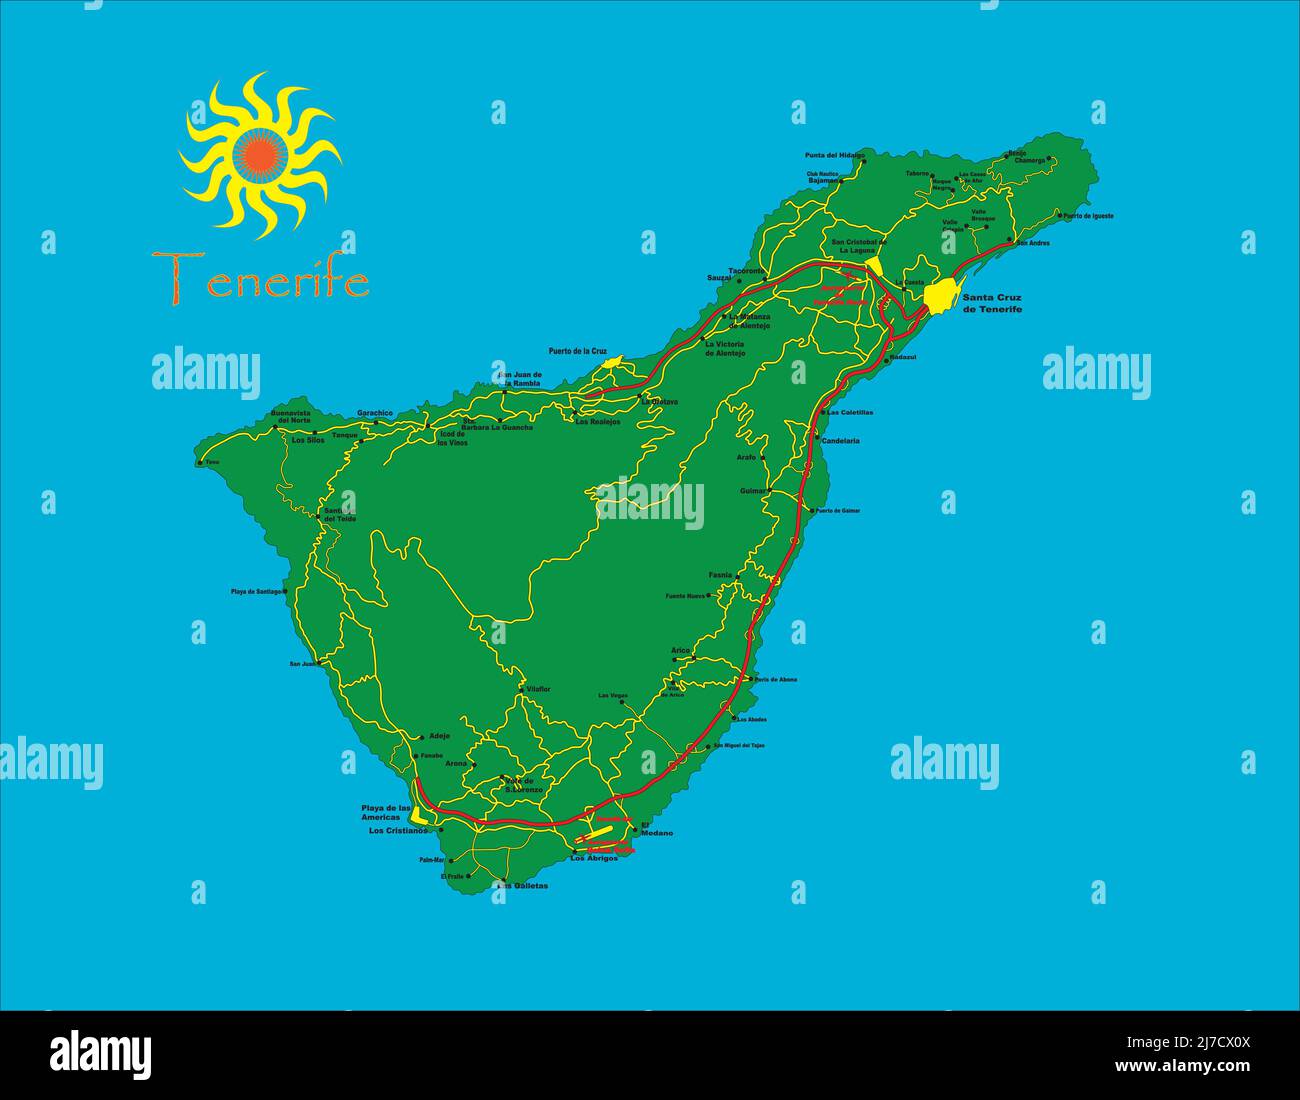 Tenerife island map with cities and main roads Stock Vector